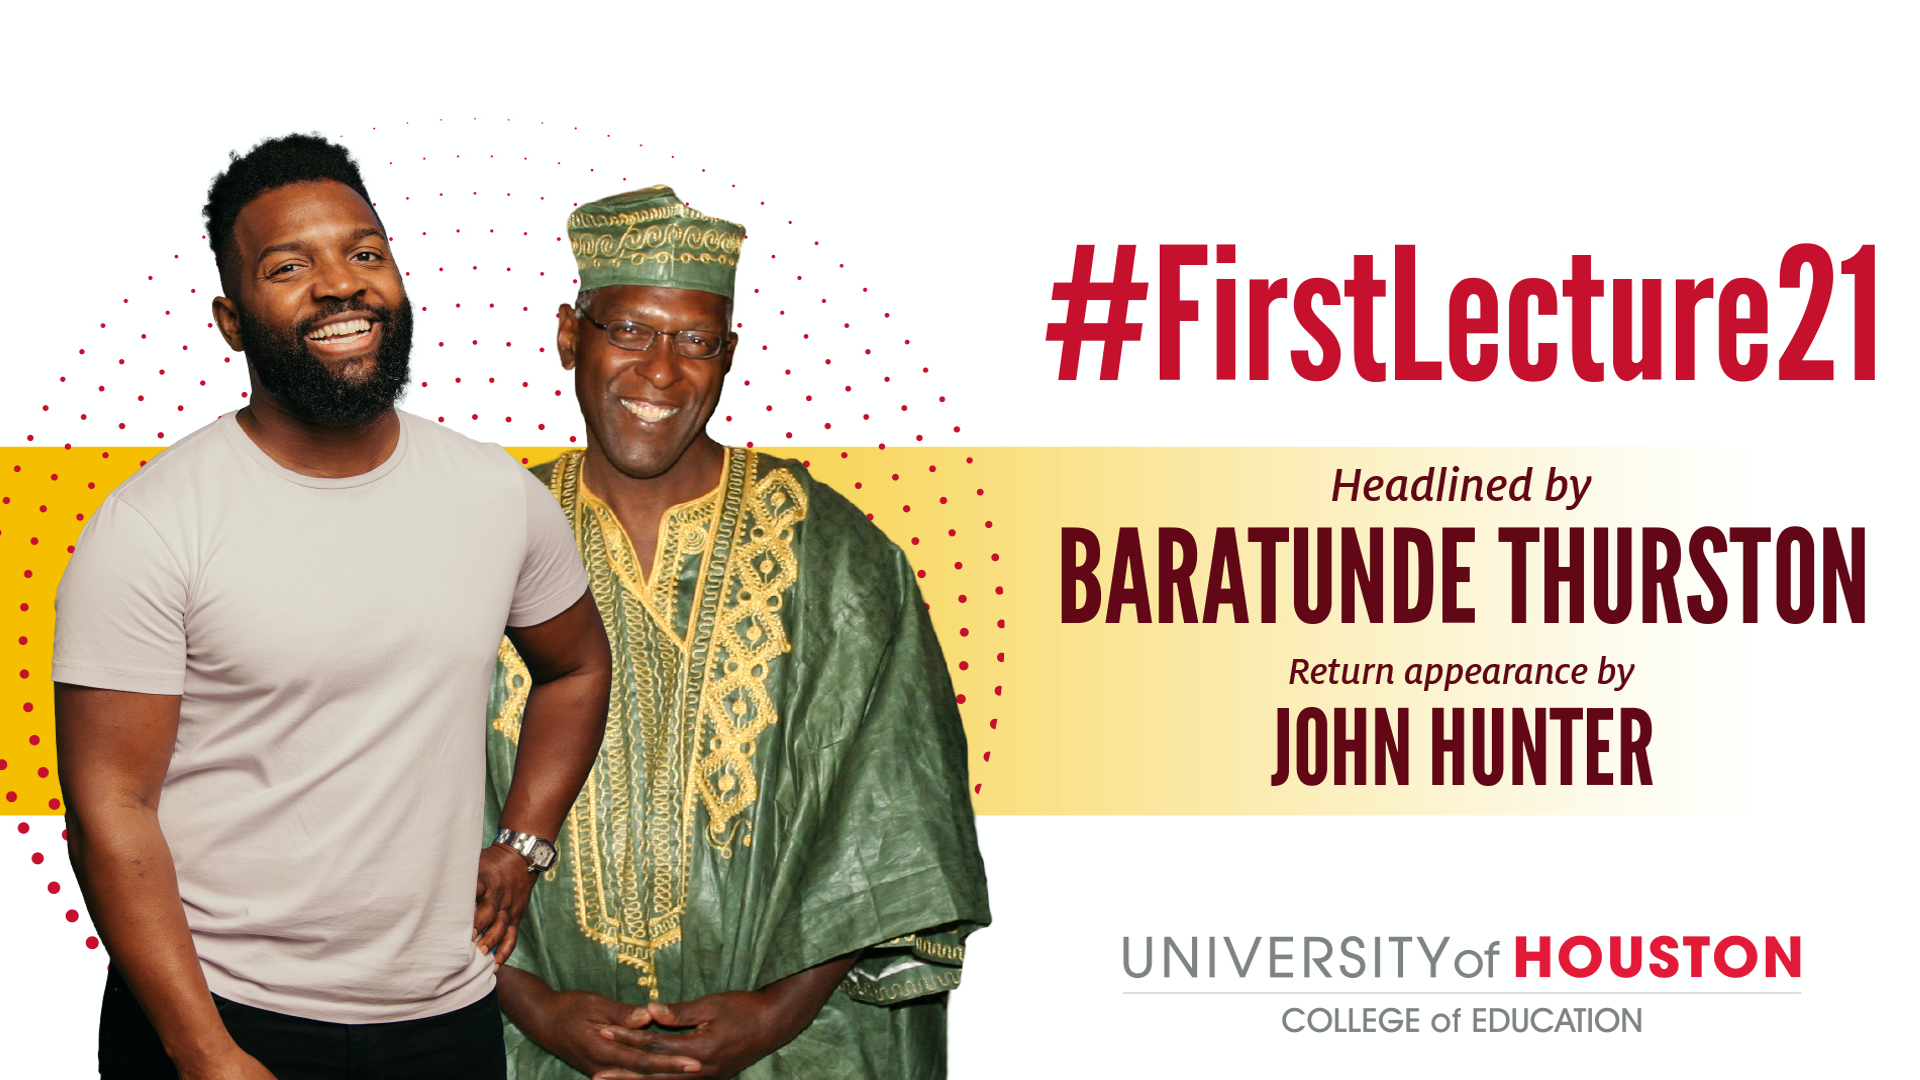 #FirstLecture21 Headlined by Baratunde Thurston and a return appearance by John Hunter